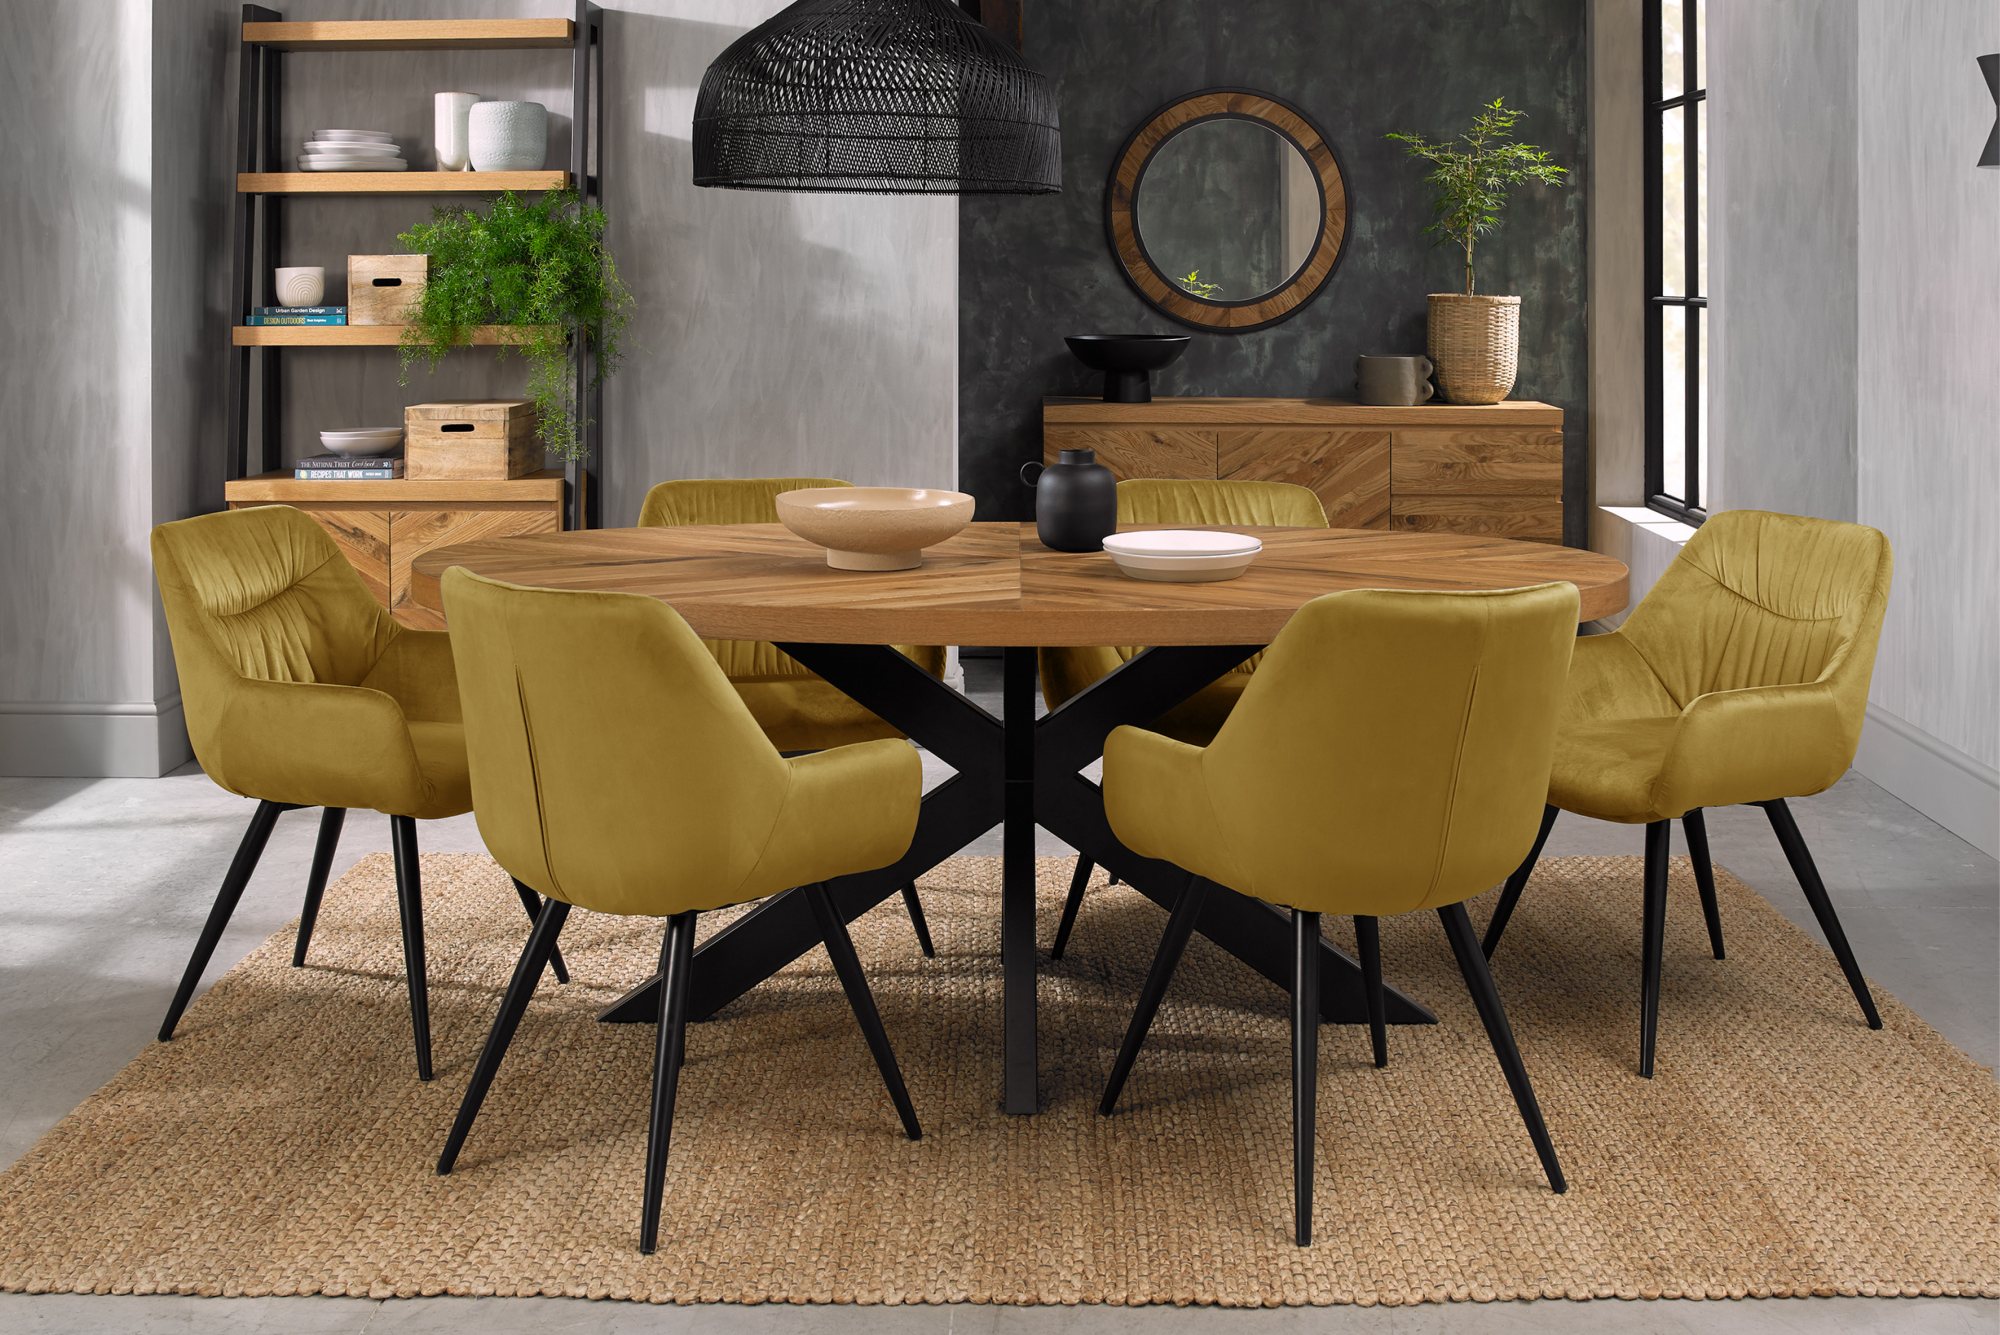 Home Origins Bosco Rustic Oak 6 seater dining table with 6 Dali chairs- mustard velvet fabric